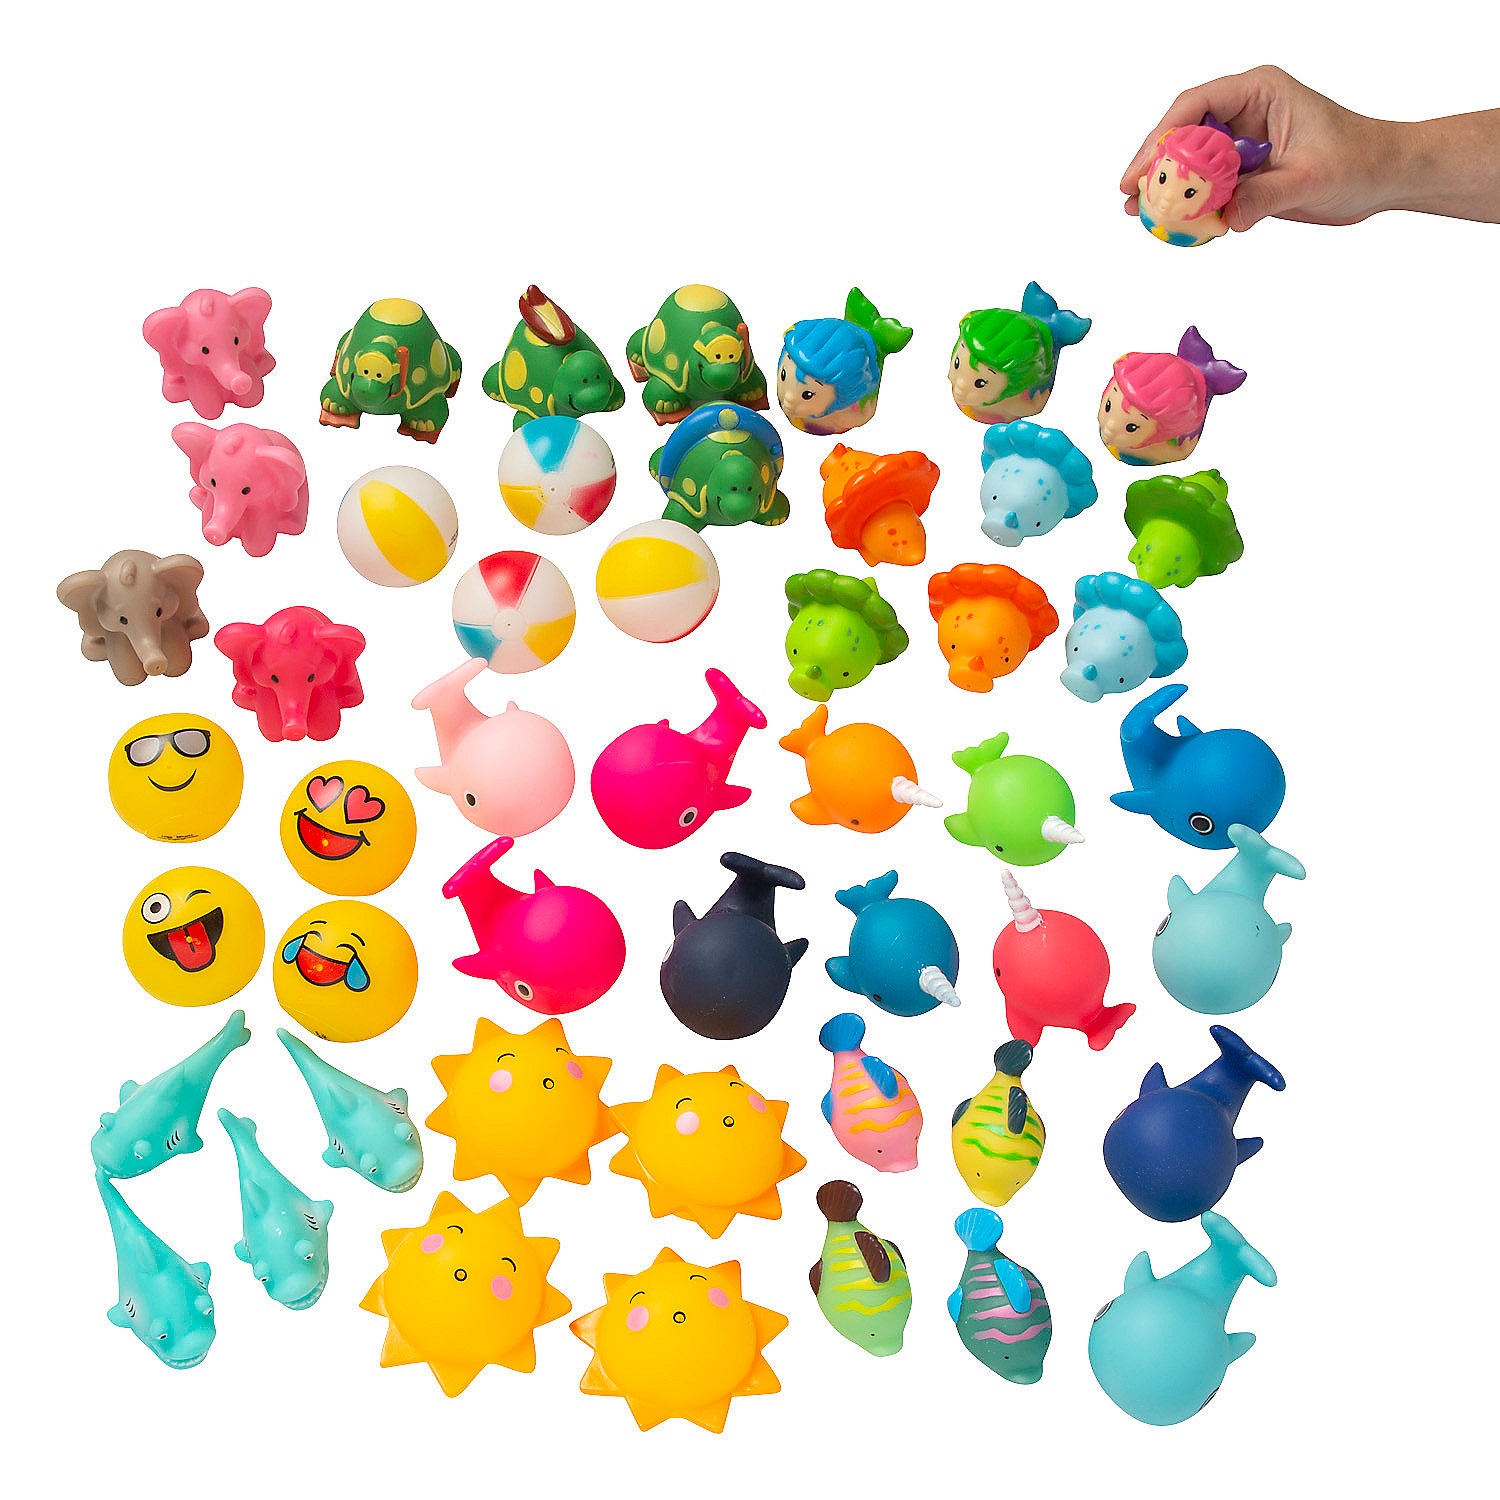 squirt-toy-assortment-50-pc-_13720899